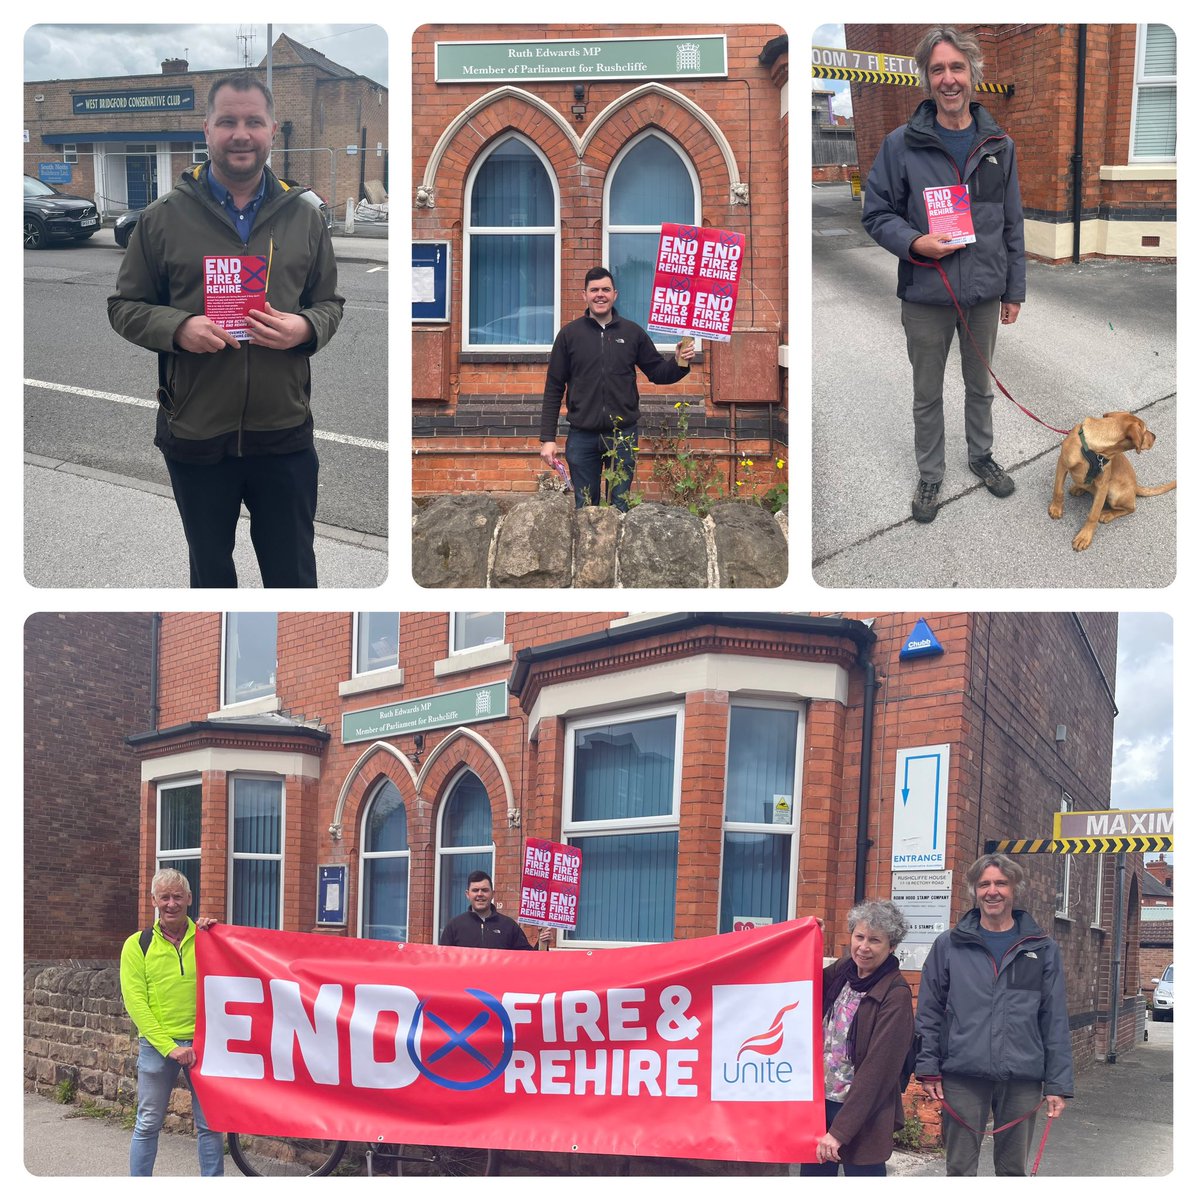 Whilst the queen speech was taking place today Unite members in #Rushcliffe were calling on @RuthEdwardsMP to put an end to #fireandrehire This abuse of workers’ rights and cannot be allowed to continue #EndFireAndRehire @UniteEastMids @unitetheunion @LewisMcAulay